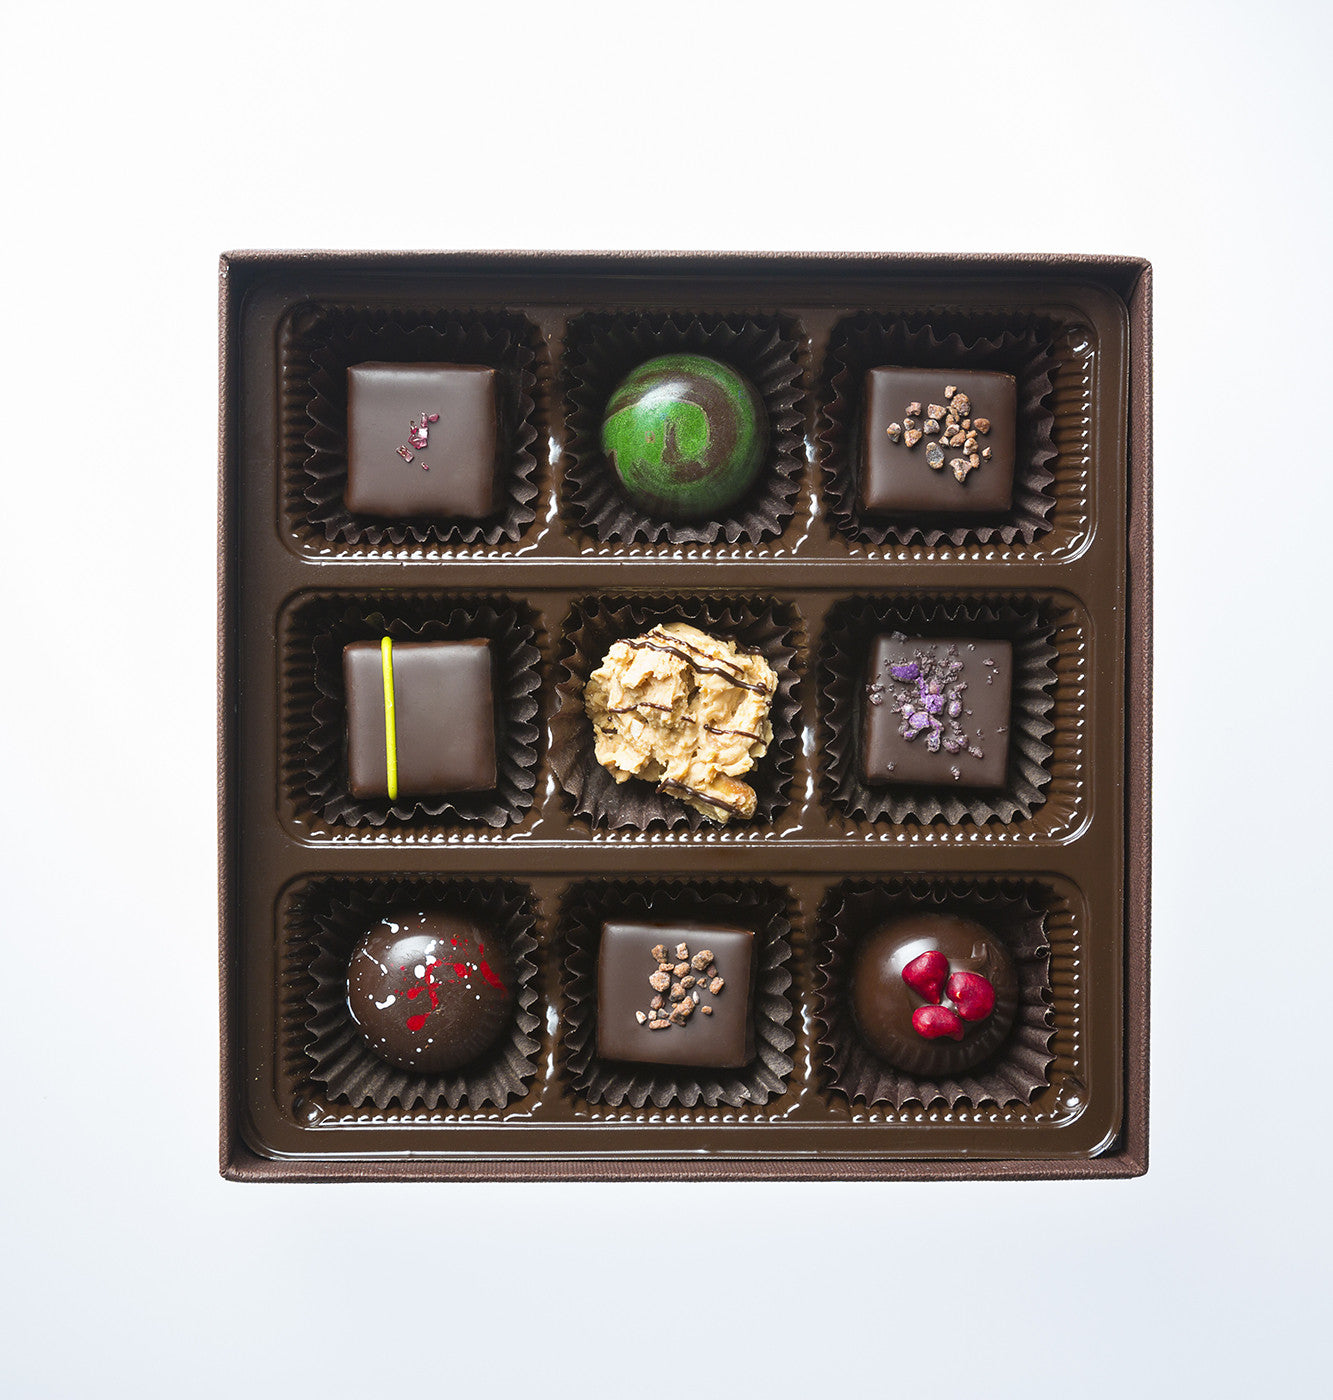 Zoe's Chocolate Co | Handcrafted, All Natural Artisan Chocolates